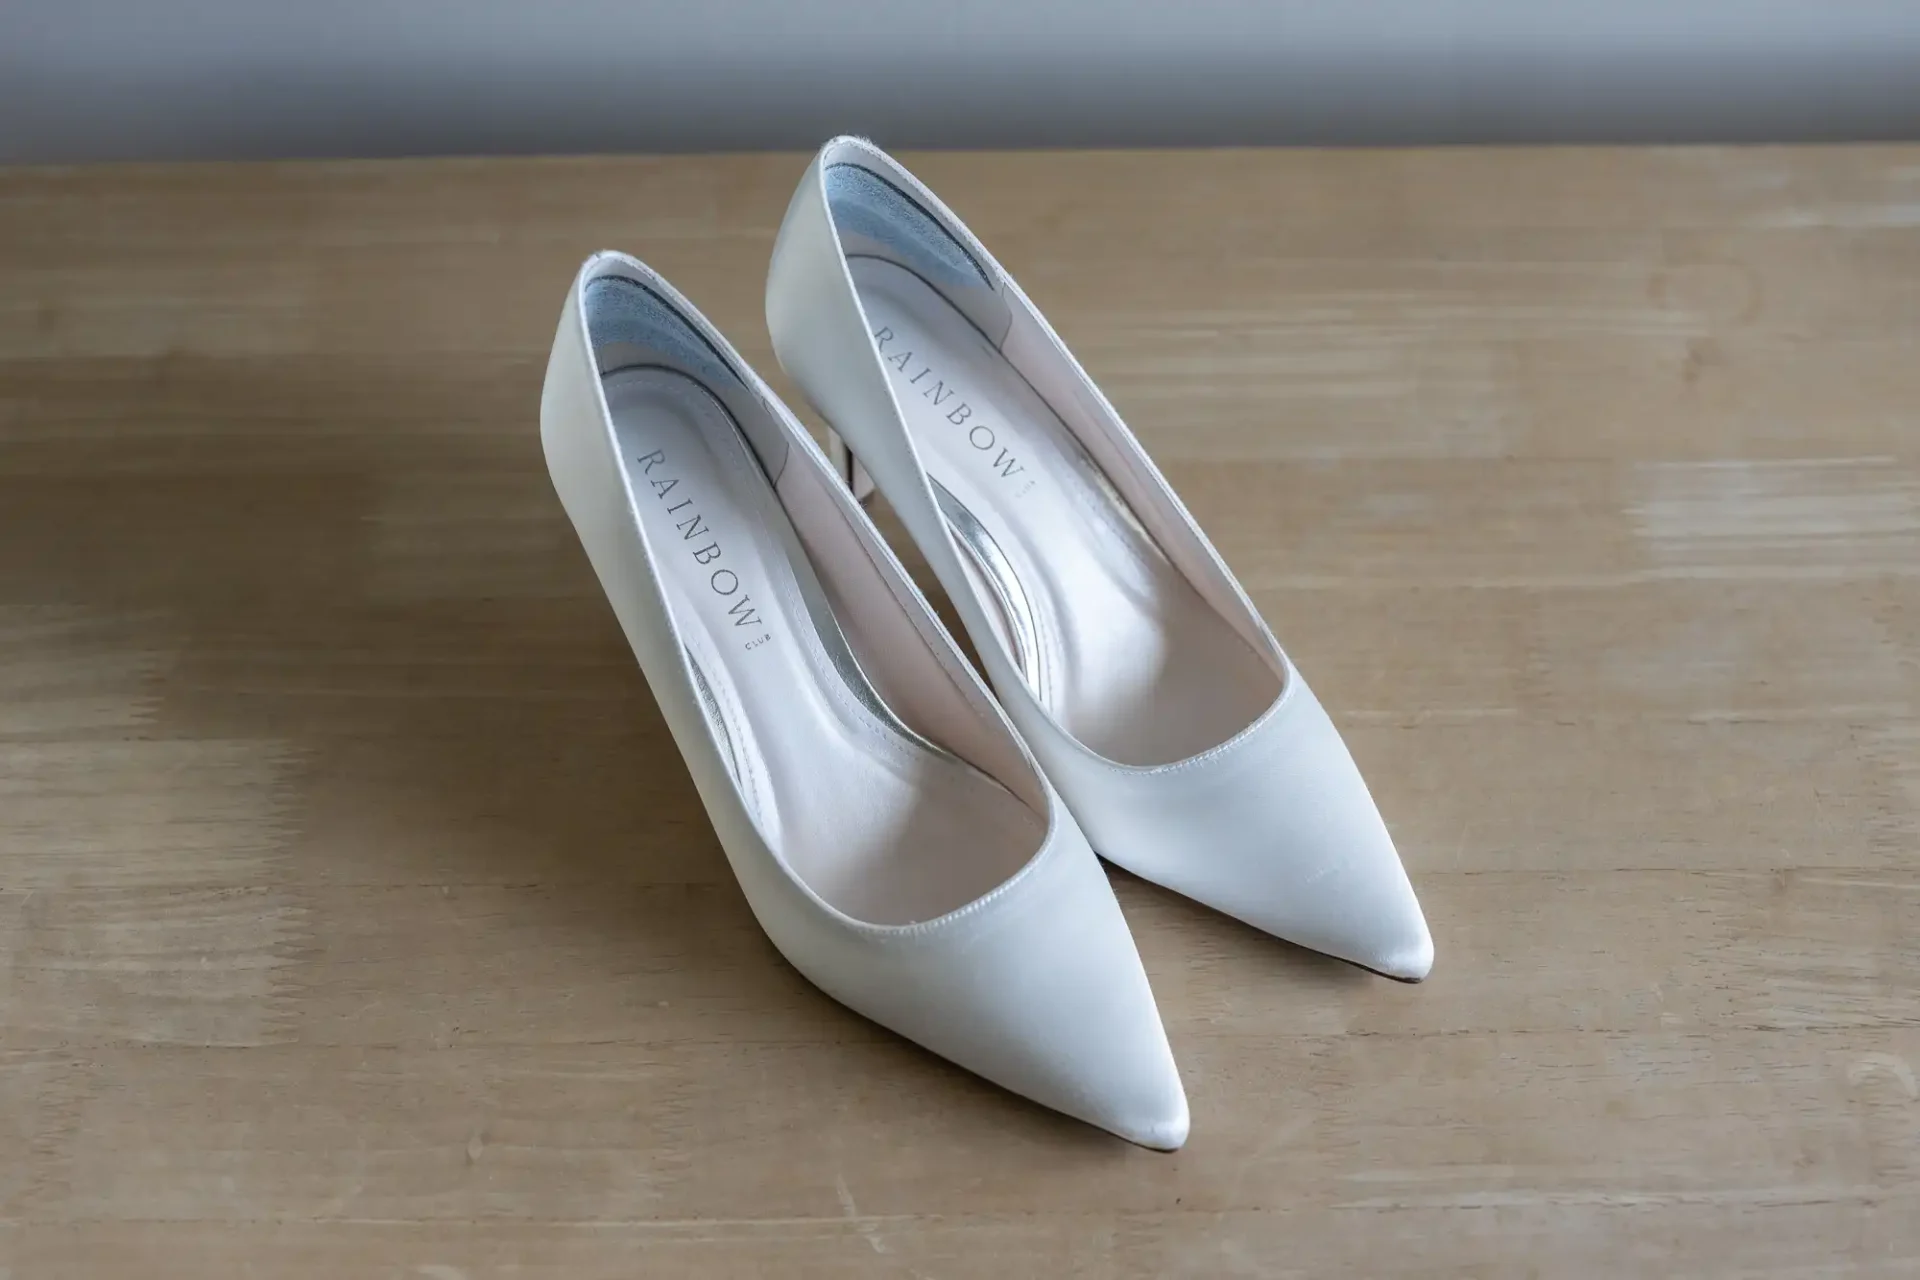 A pair of white satin bridal shoes on a wooden floor.